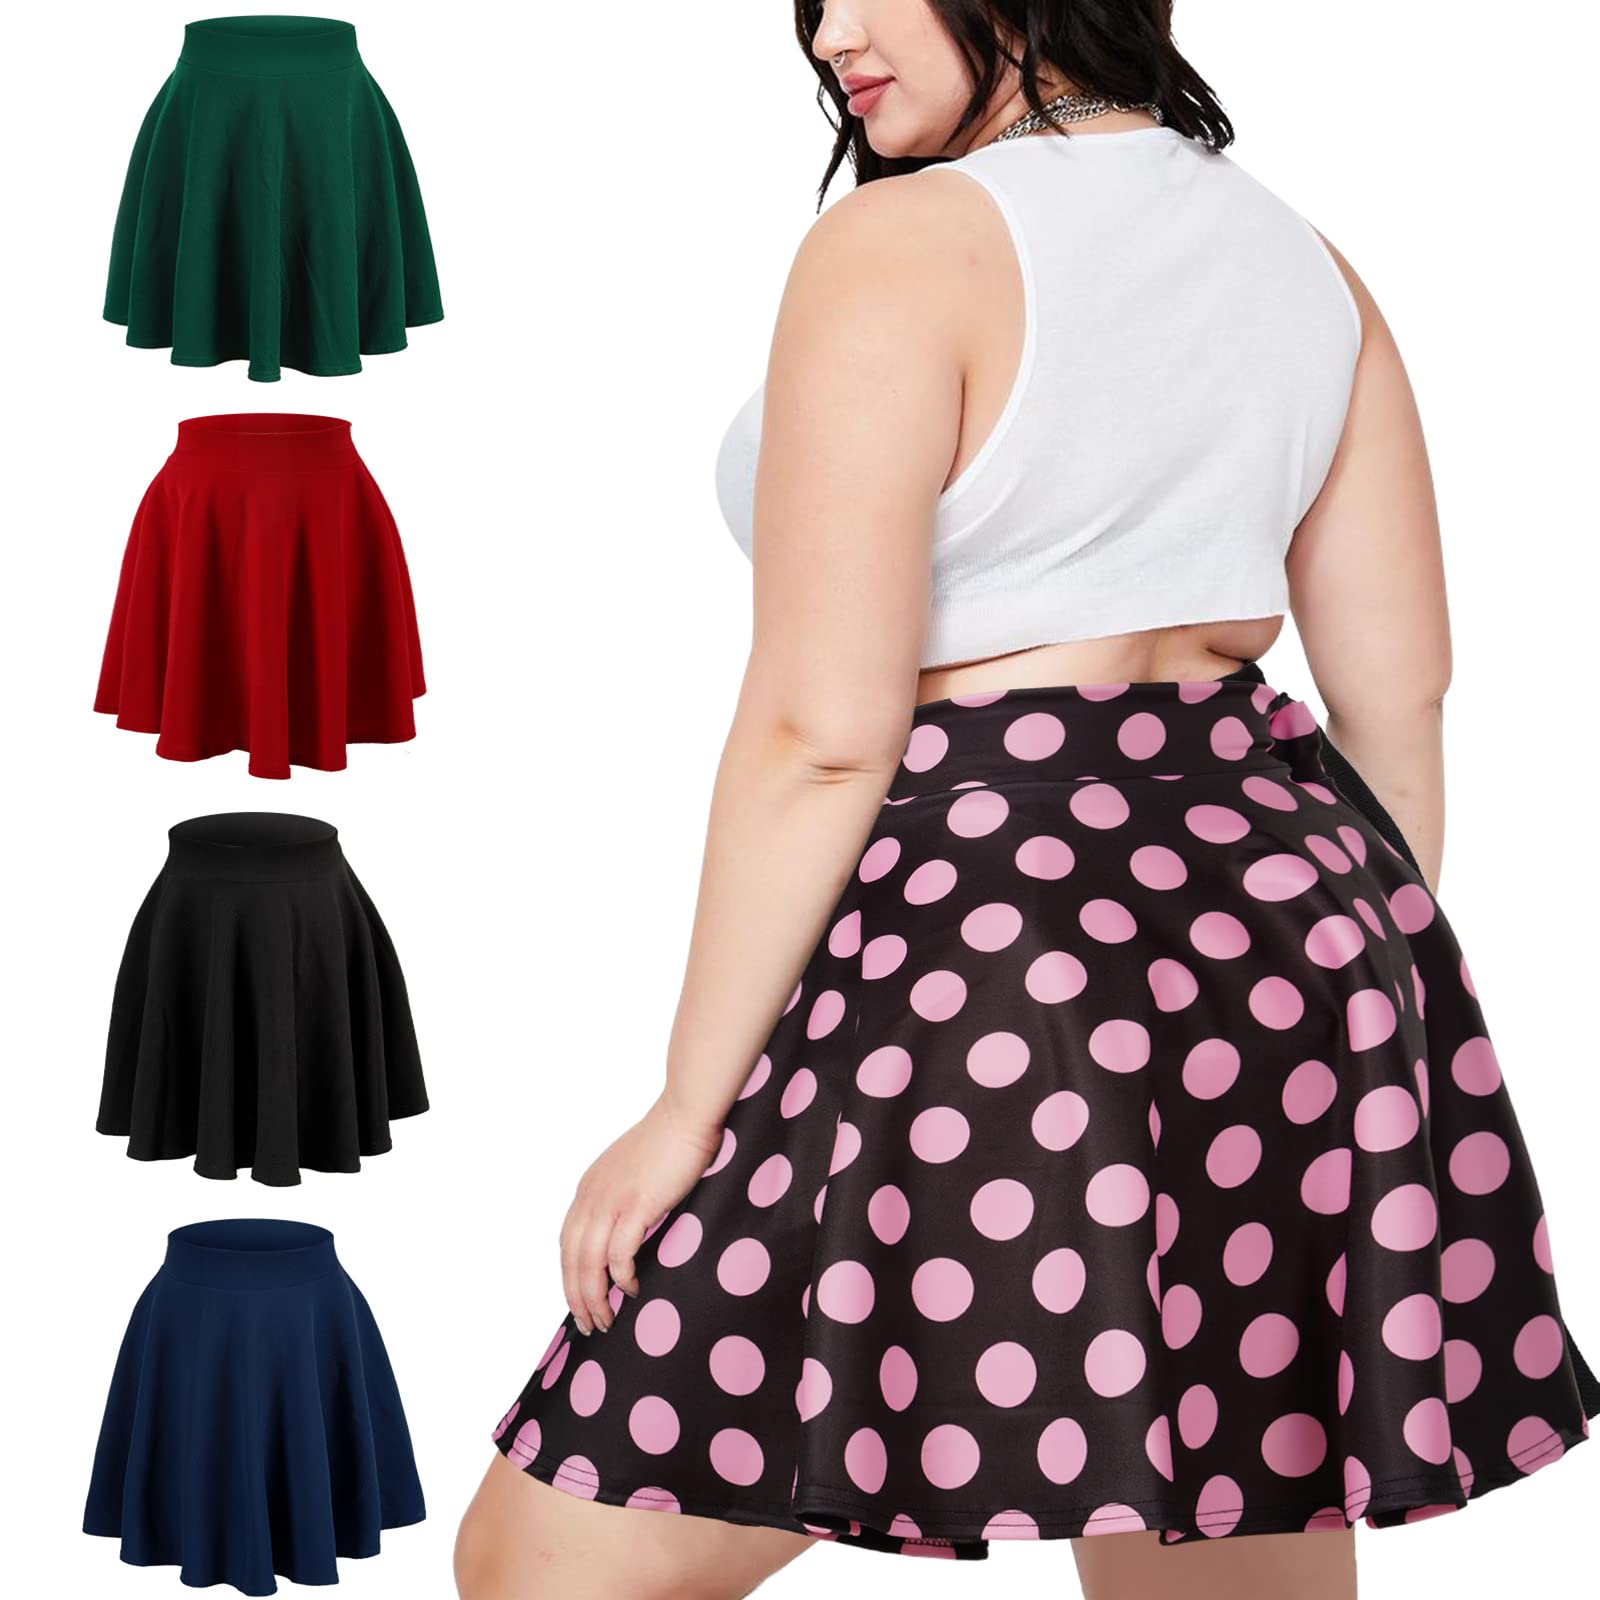 High Waisted Skater Skirt Plus Size-Black & Pink Dots - Moon Wood